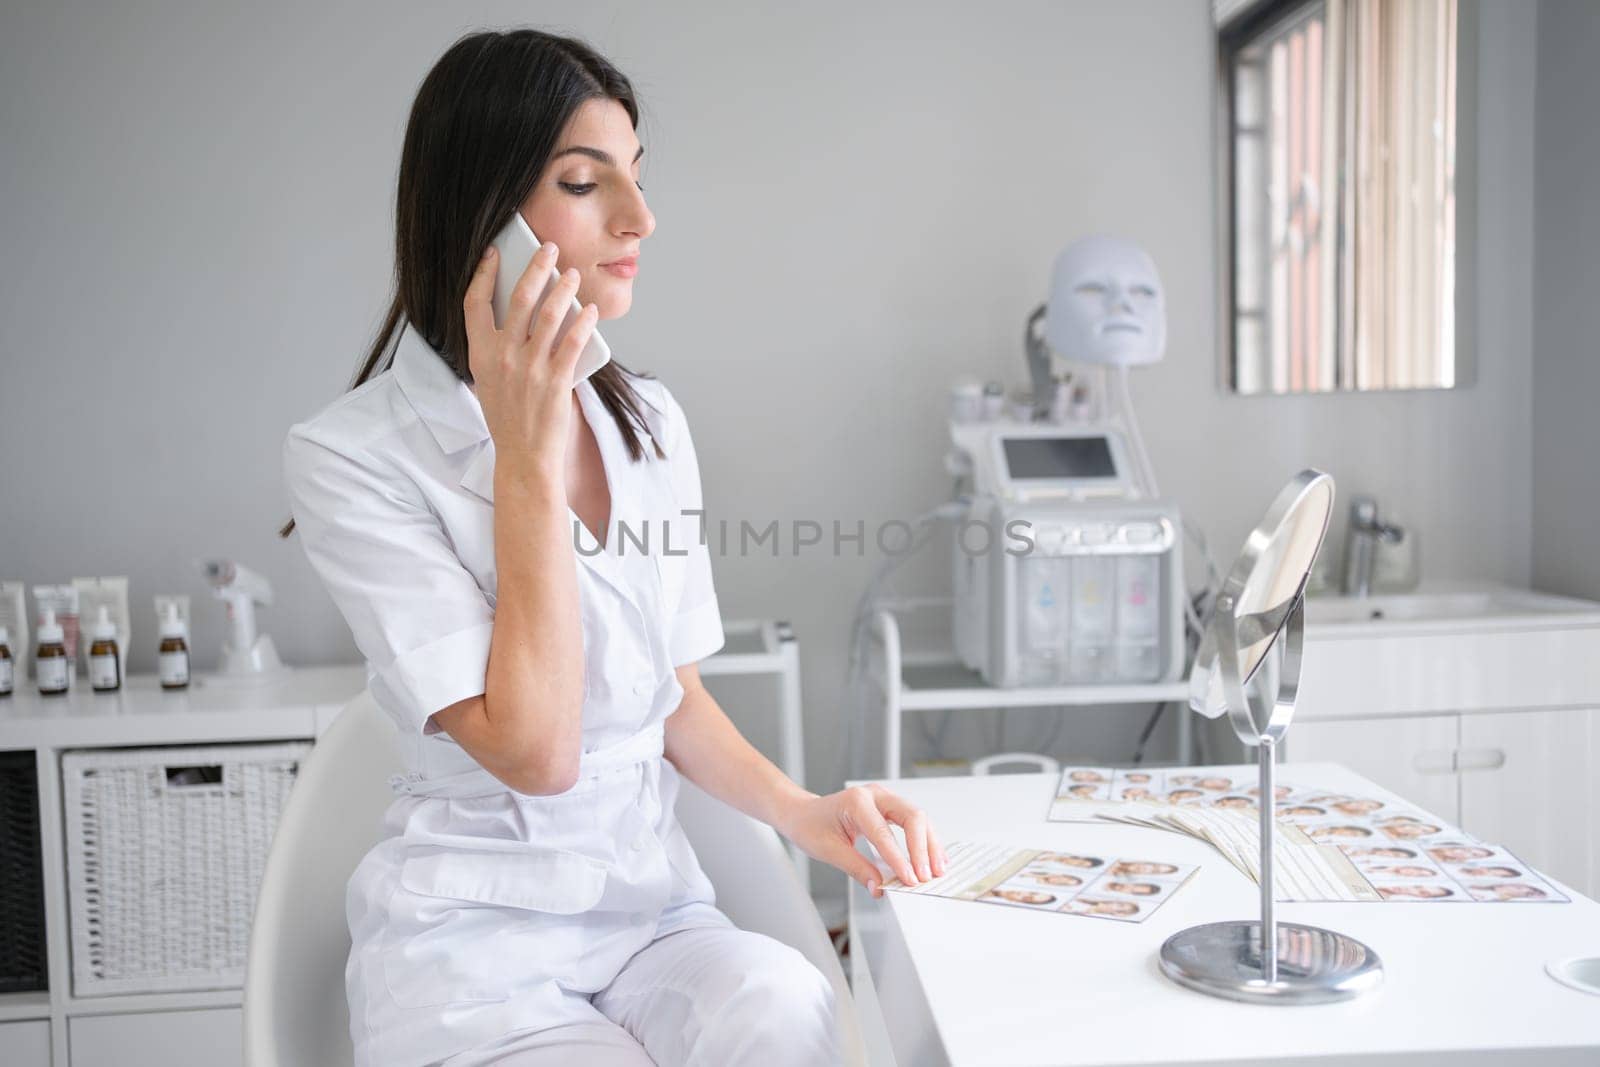 Young female cosmetologist in white uniform talking on smartphone at desk. Woman beautician discussing facial skin treatments for clients on phone call at beauty spa salon.